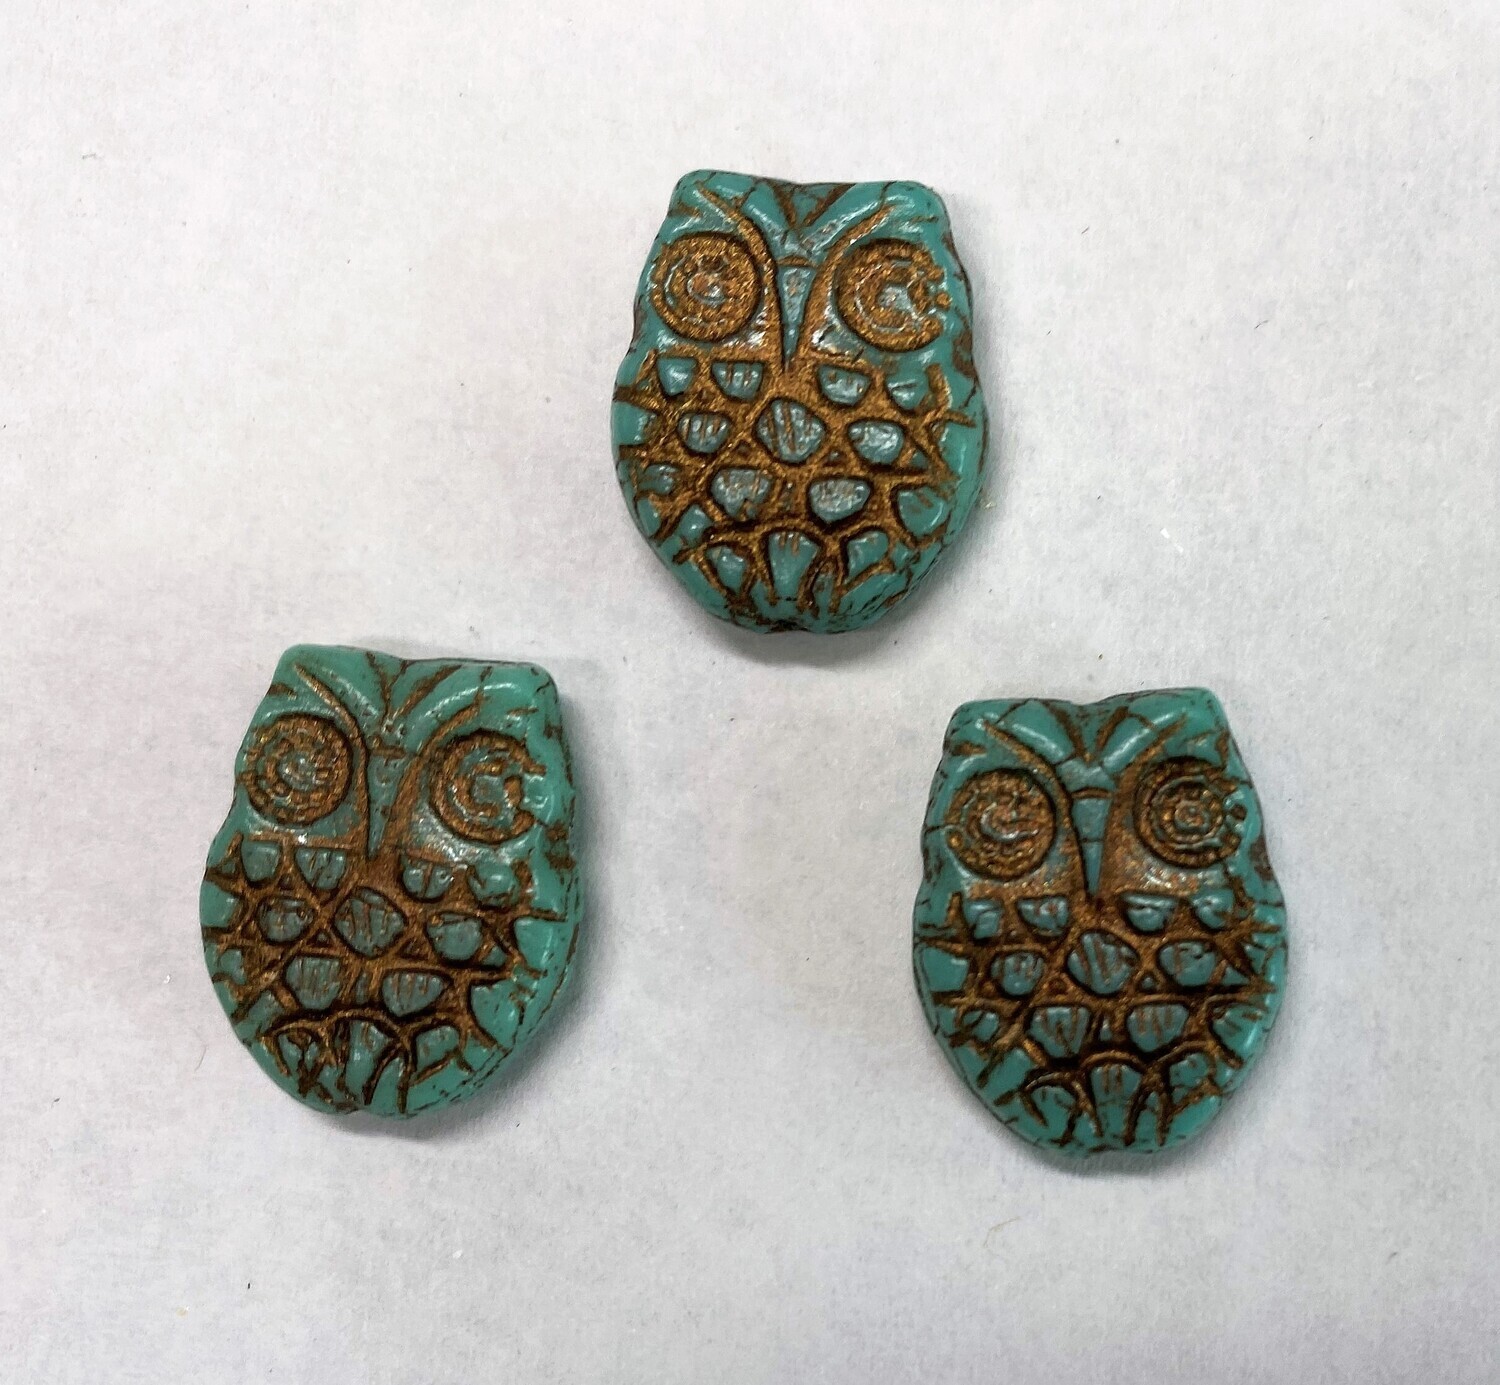 3 Turquoise Owls - Czech Glass Cabochons